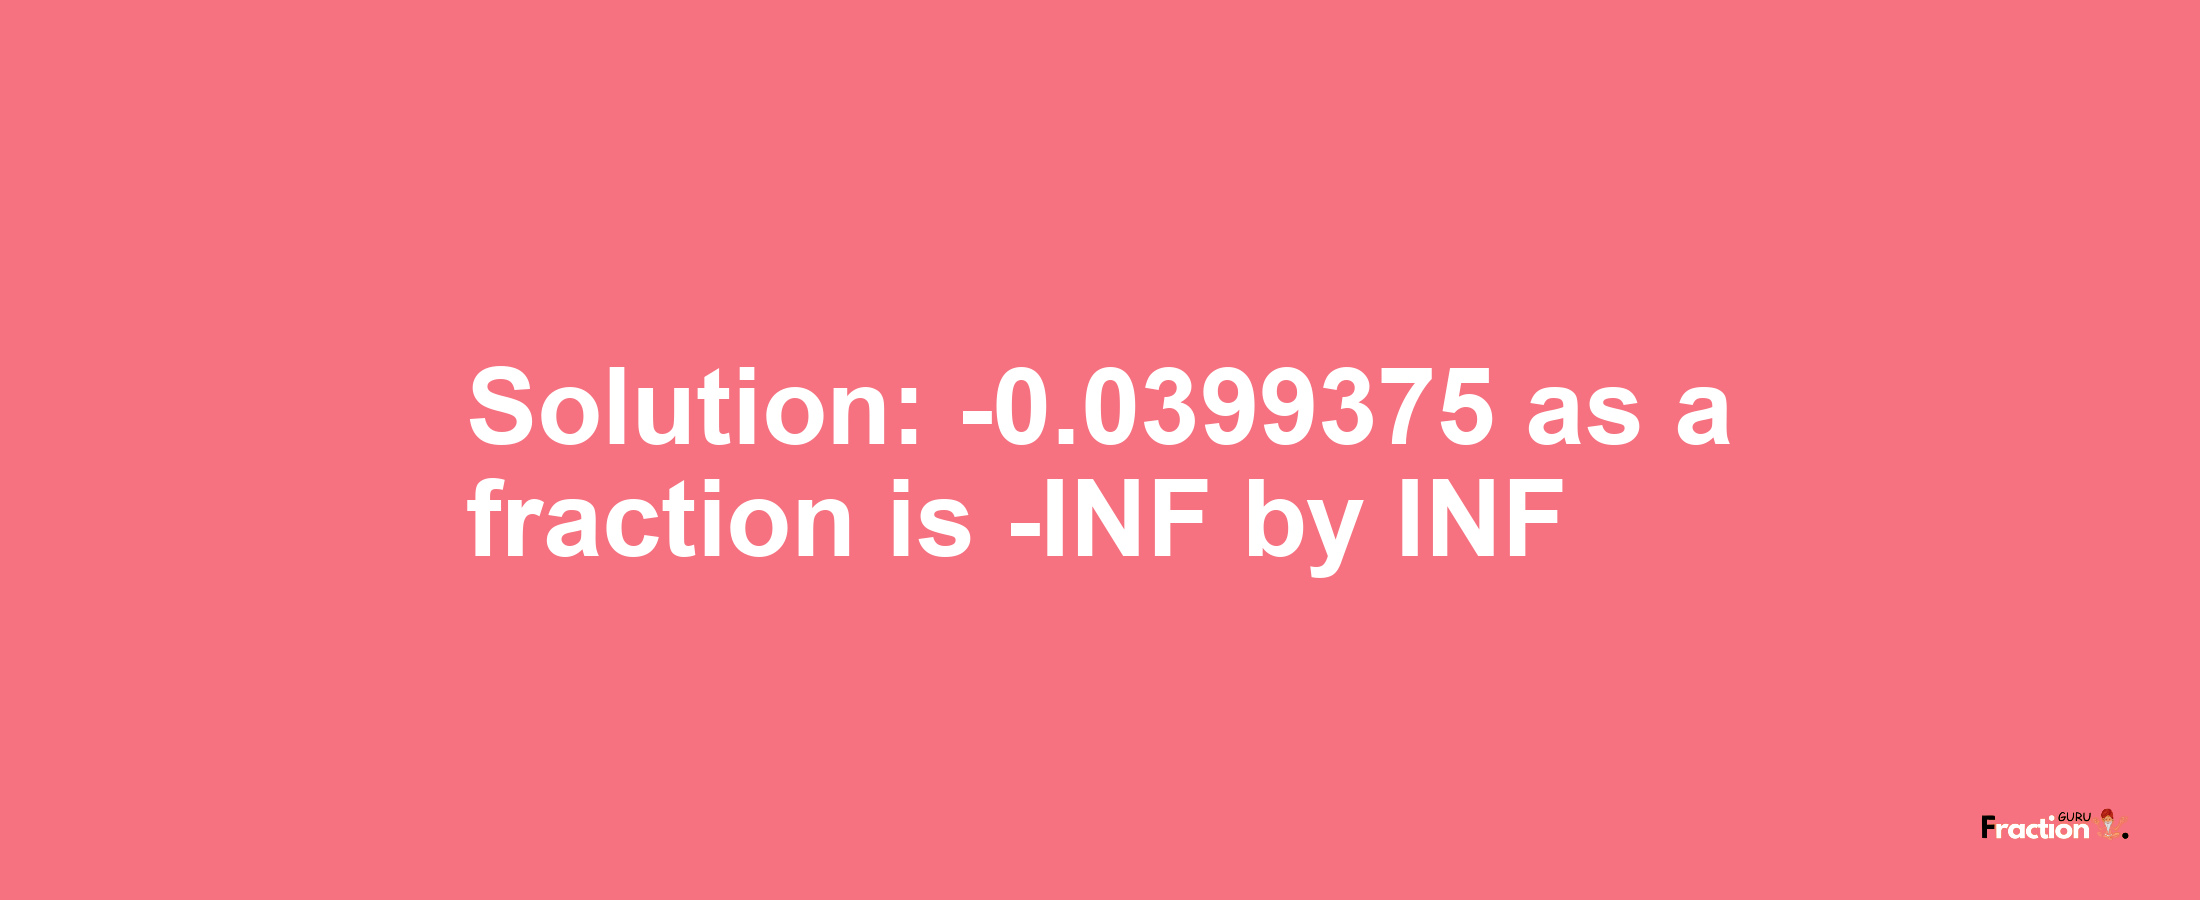 Solution:-0.0399375 as a fraction is -INF/INF